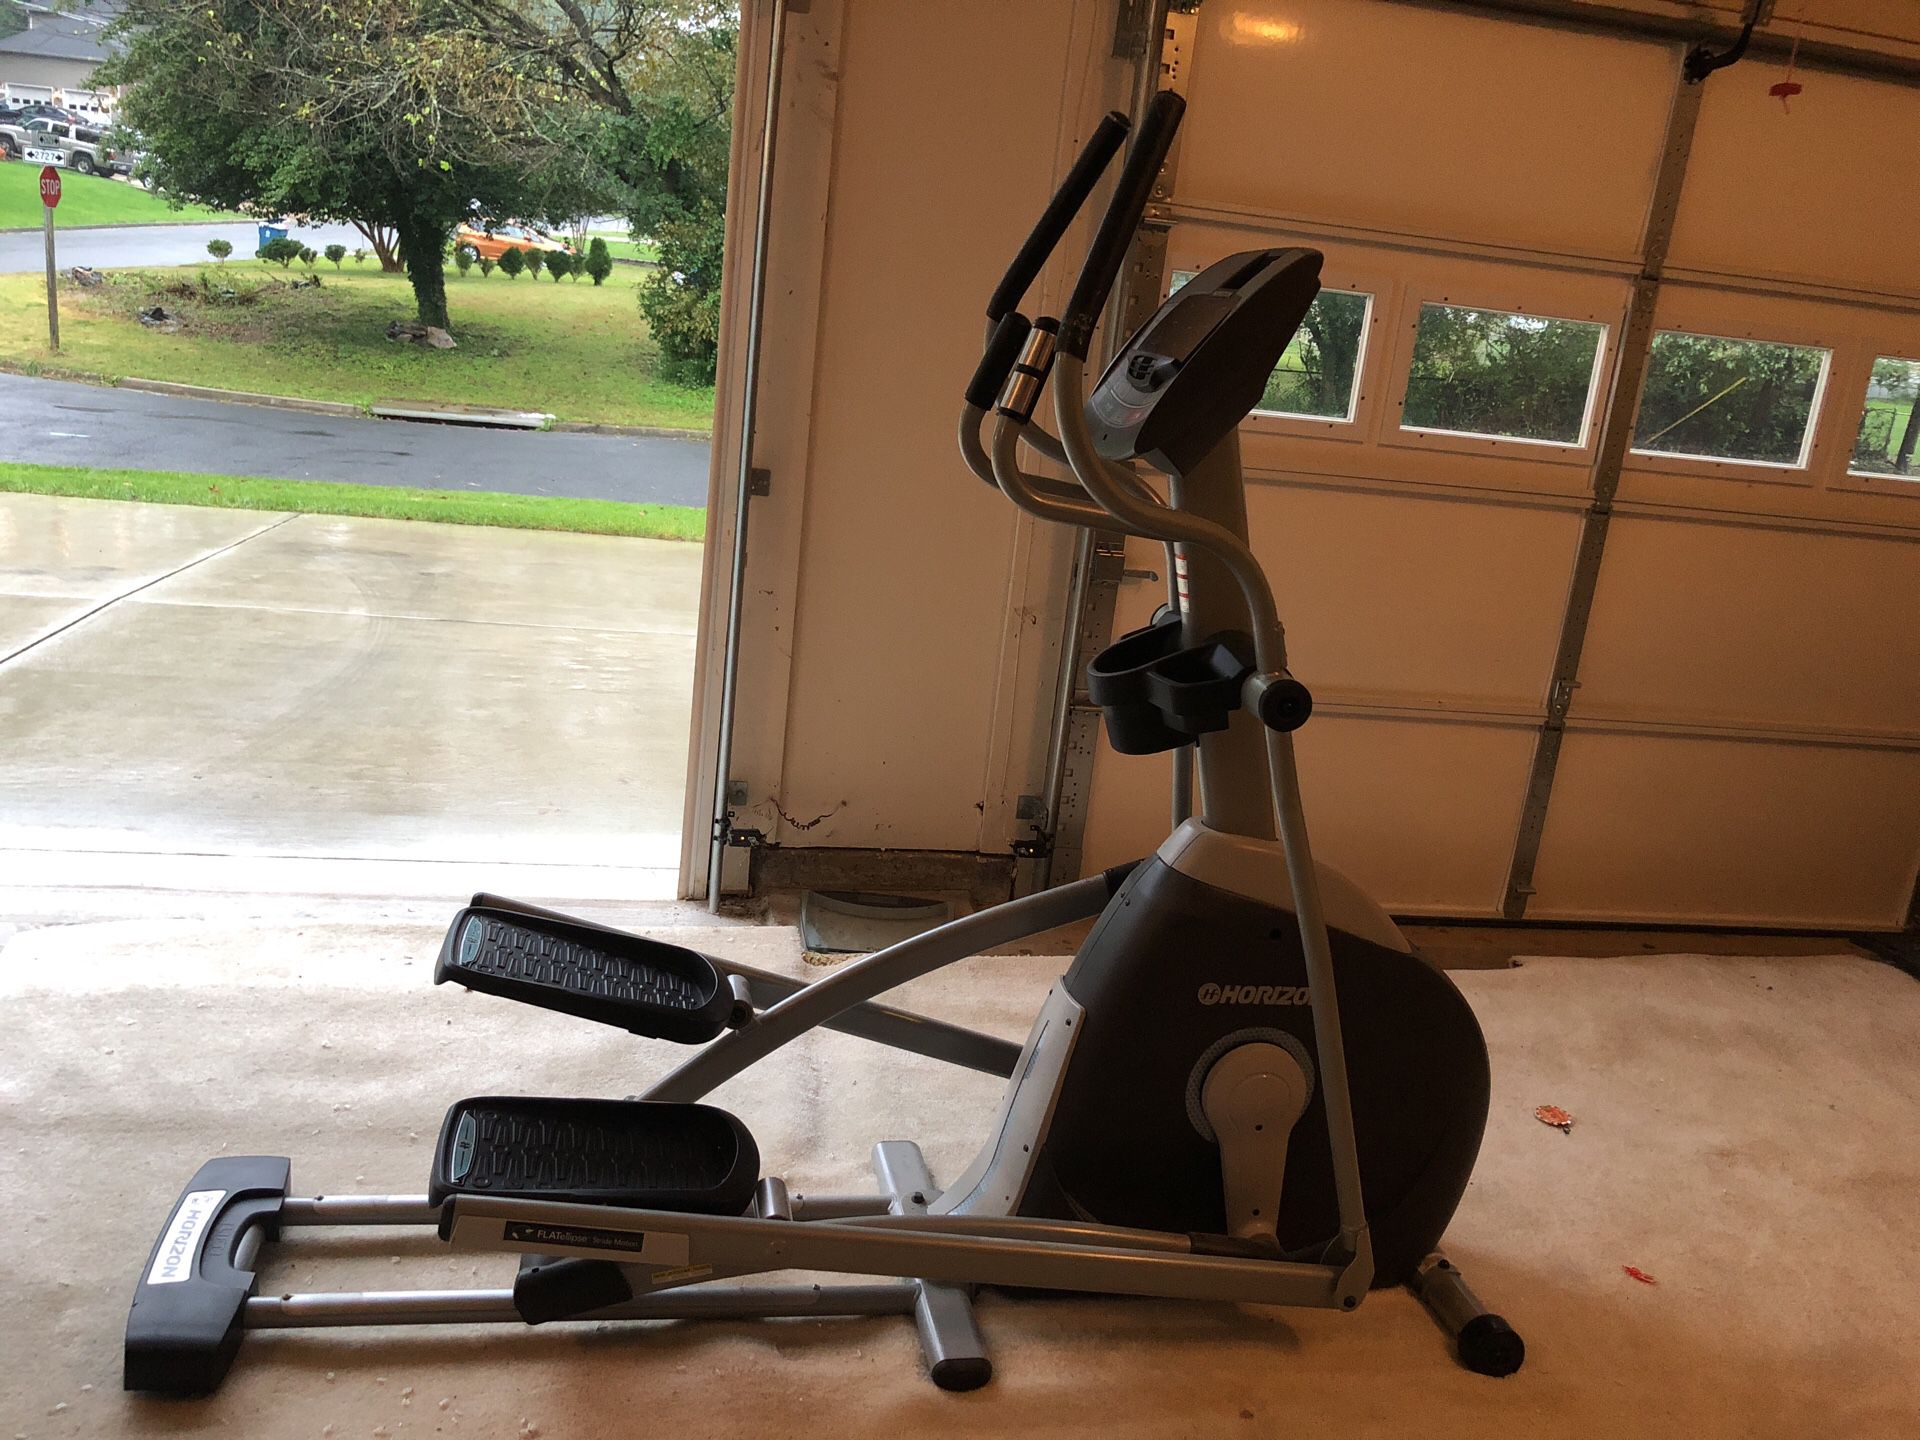 Rarely used Horizon elliptical trainer for sale